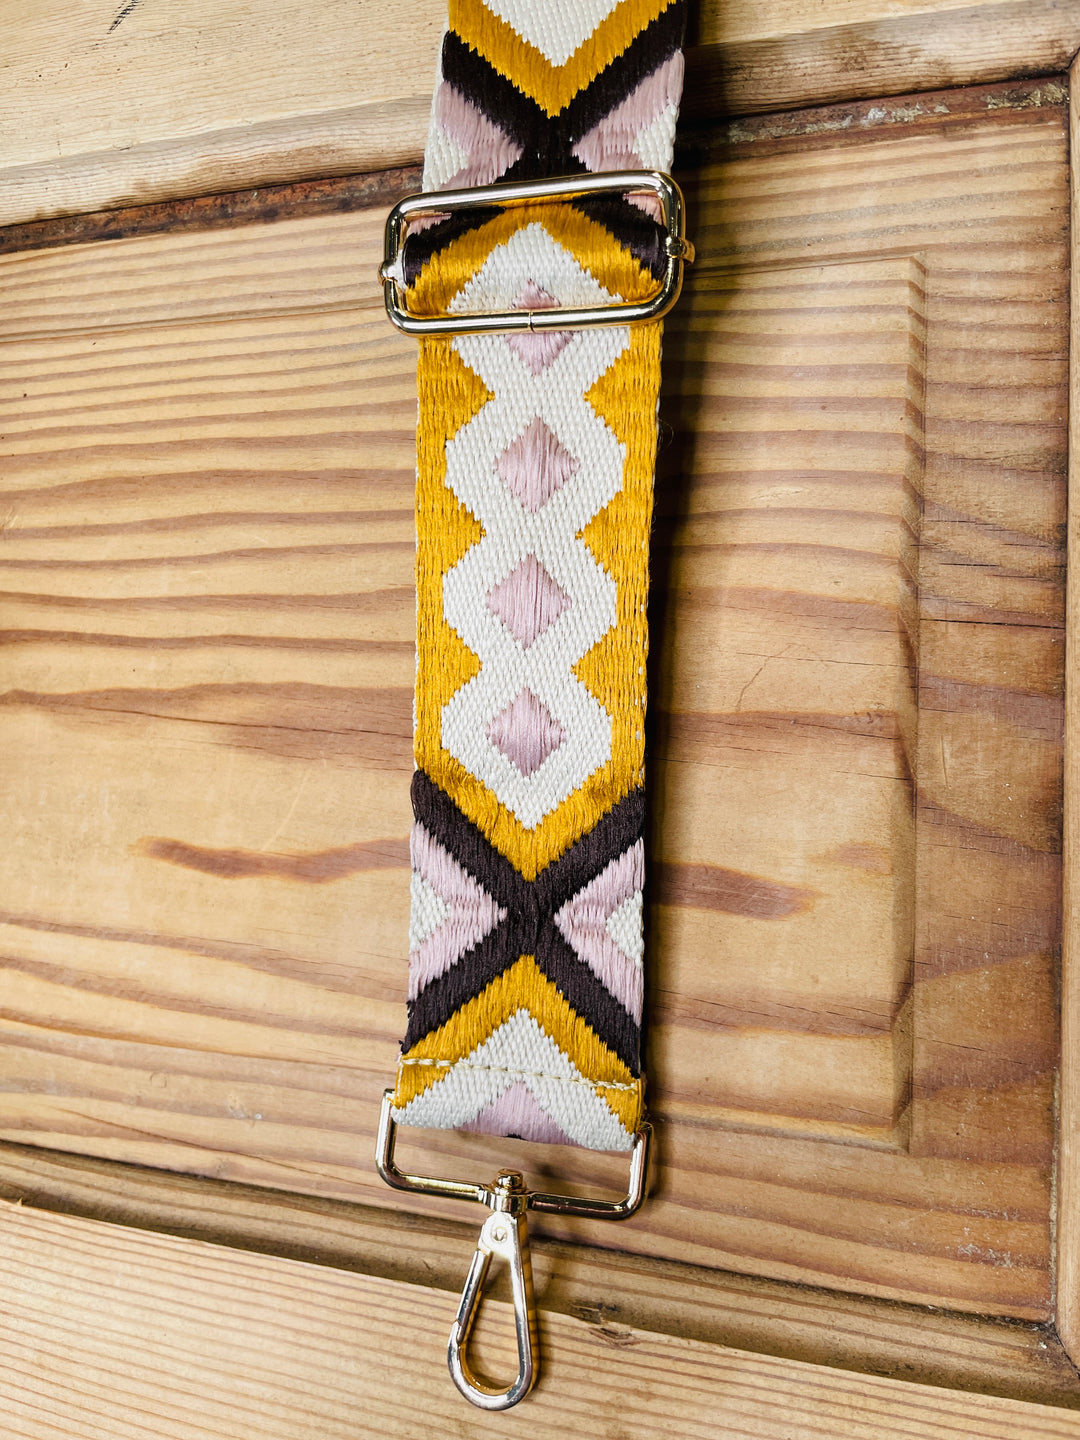 Endless Options: Adjustable Woven Purse Strap